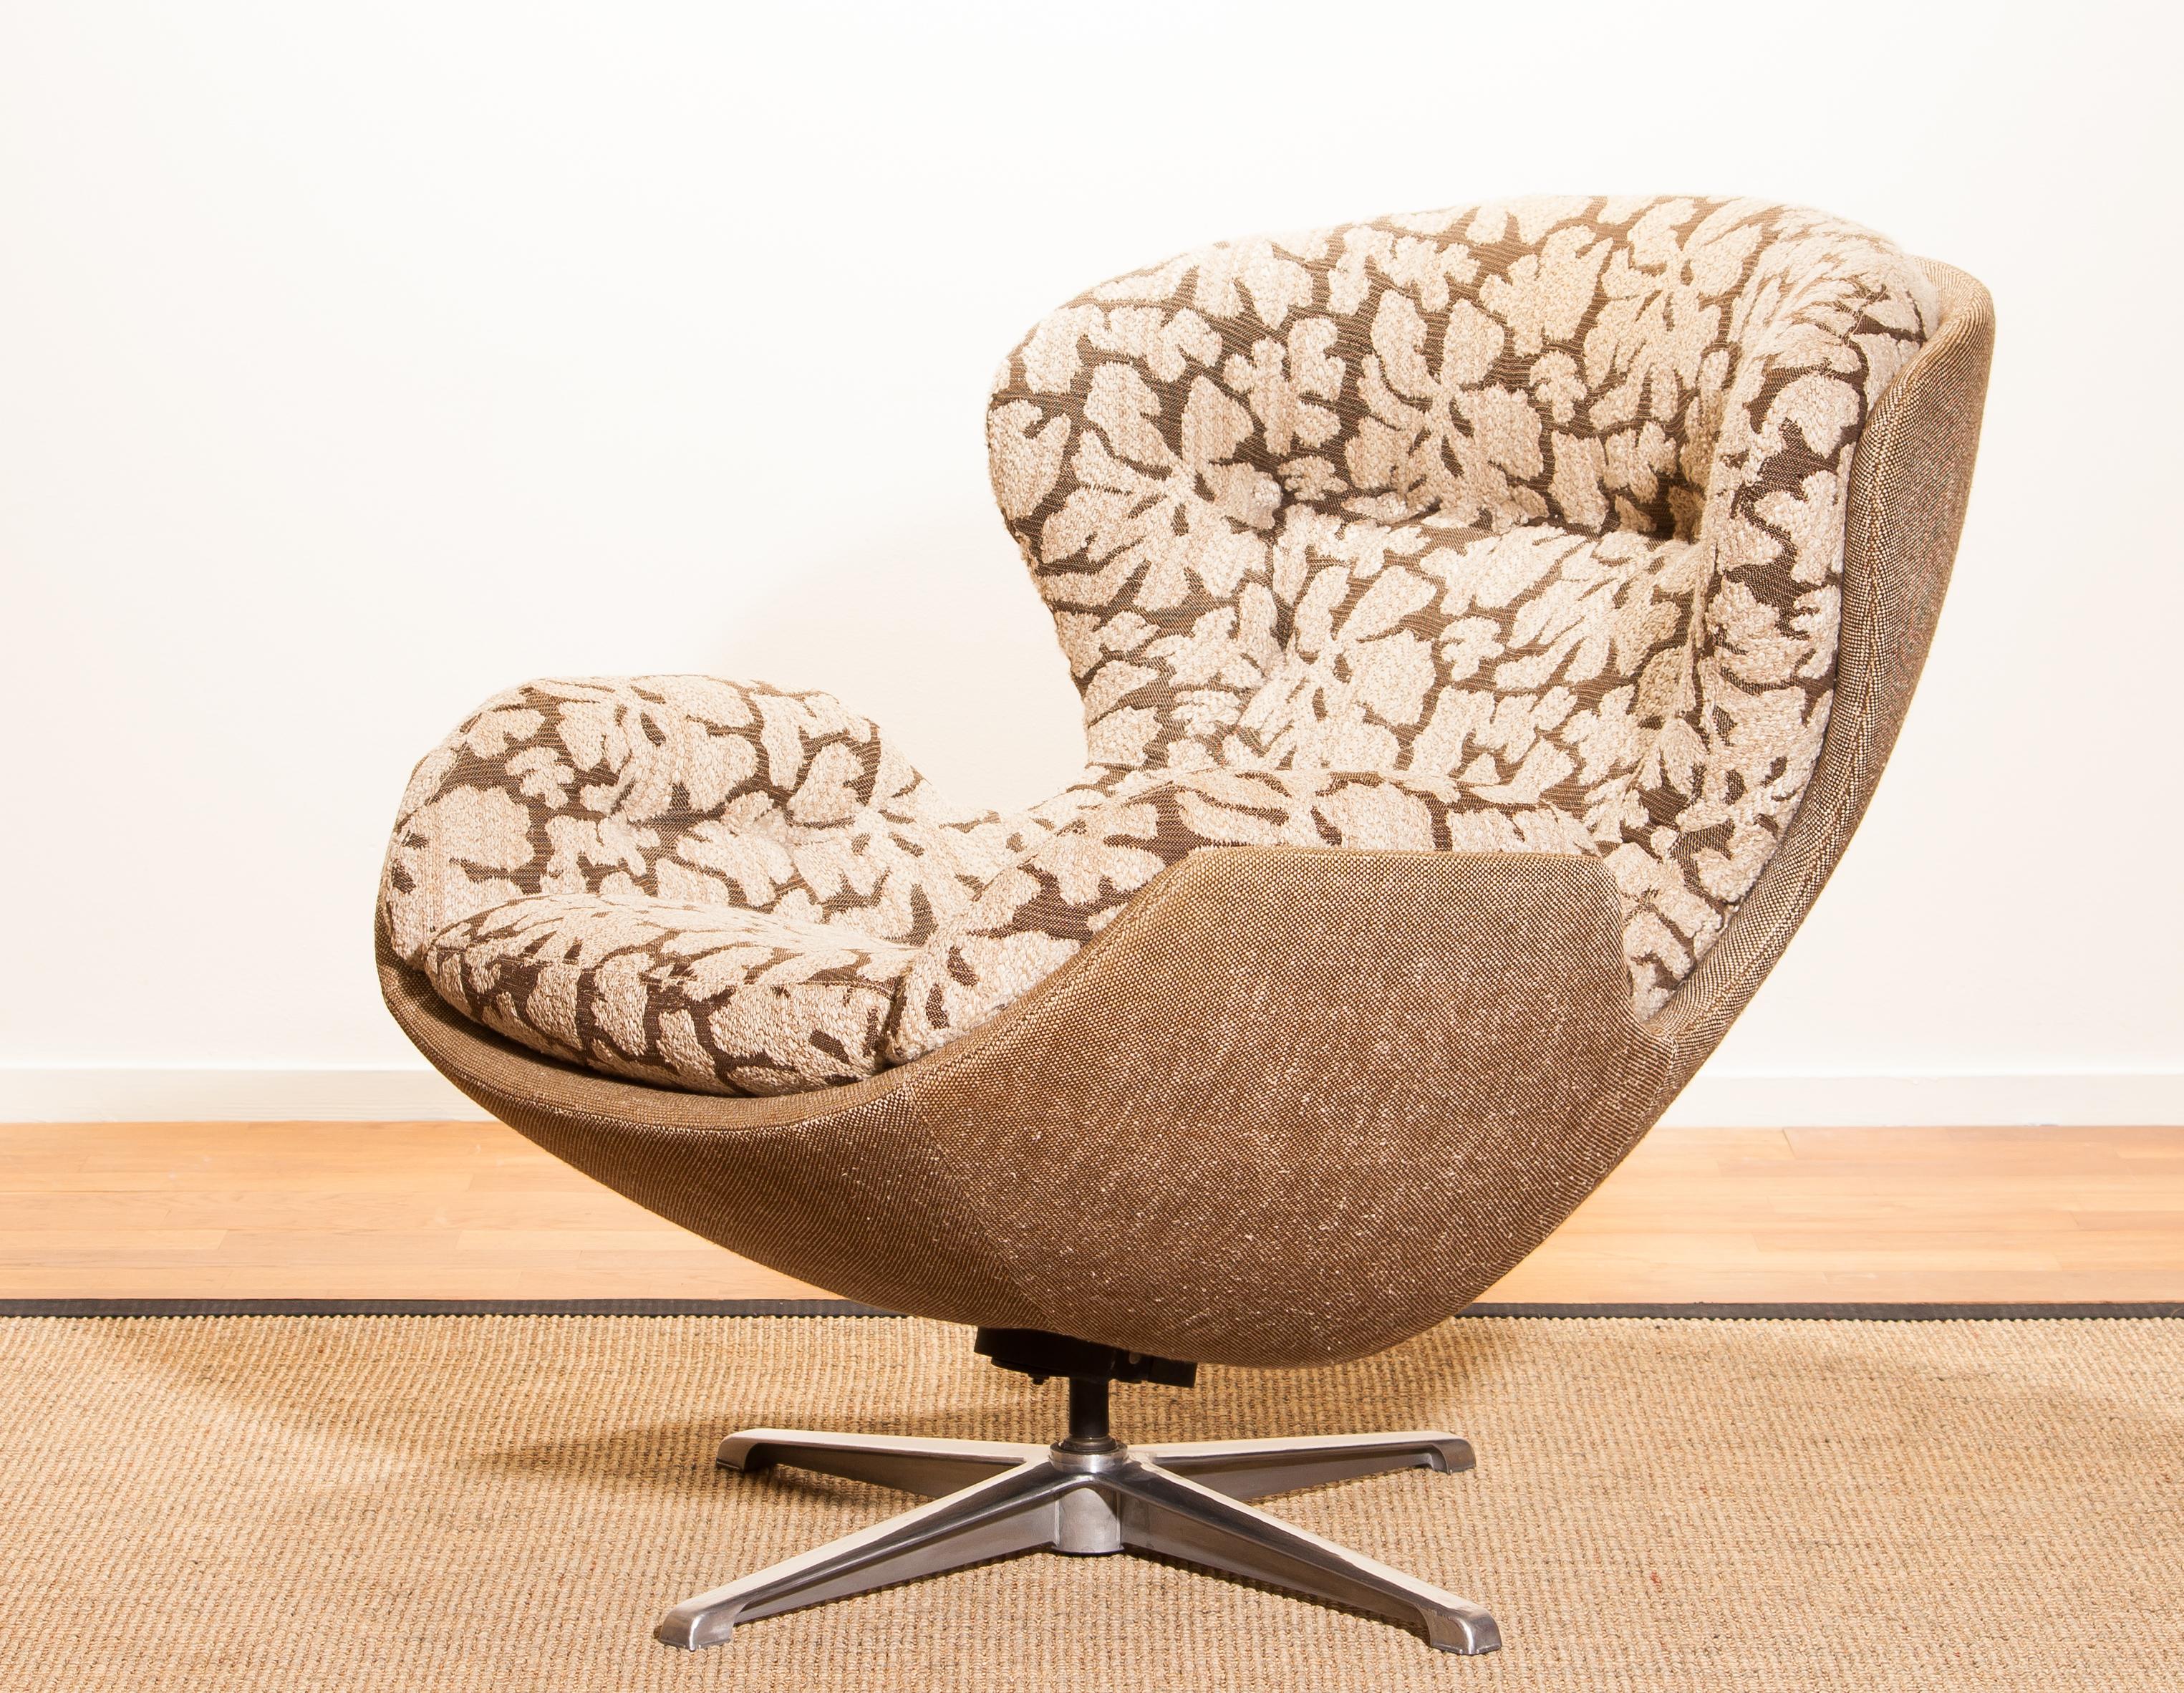 Beautiful swivel lounge chair designed by Lennart Bender for Ulferts Möbler, Sweden.
This comfortable chair is made of a steel swivel frame with an original fabric upholstered seating.
Period, 1970s
Dimensions: H.90 cm, W.82 cm, D.95 cm.